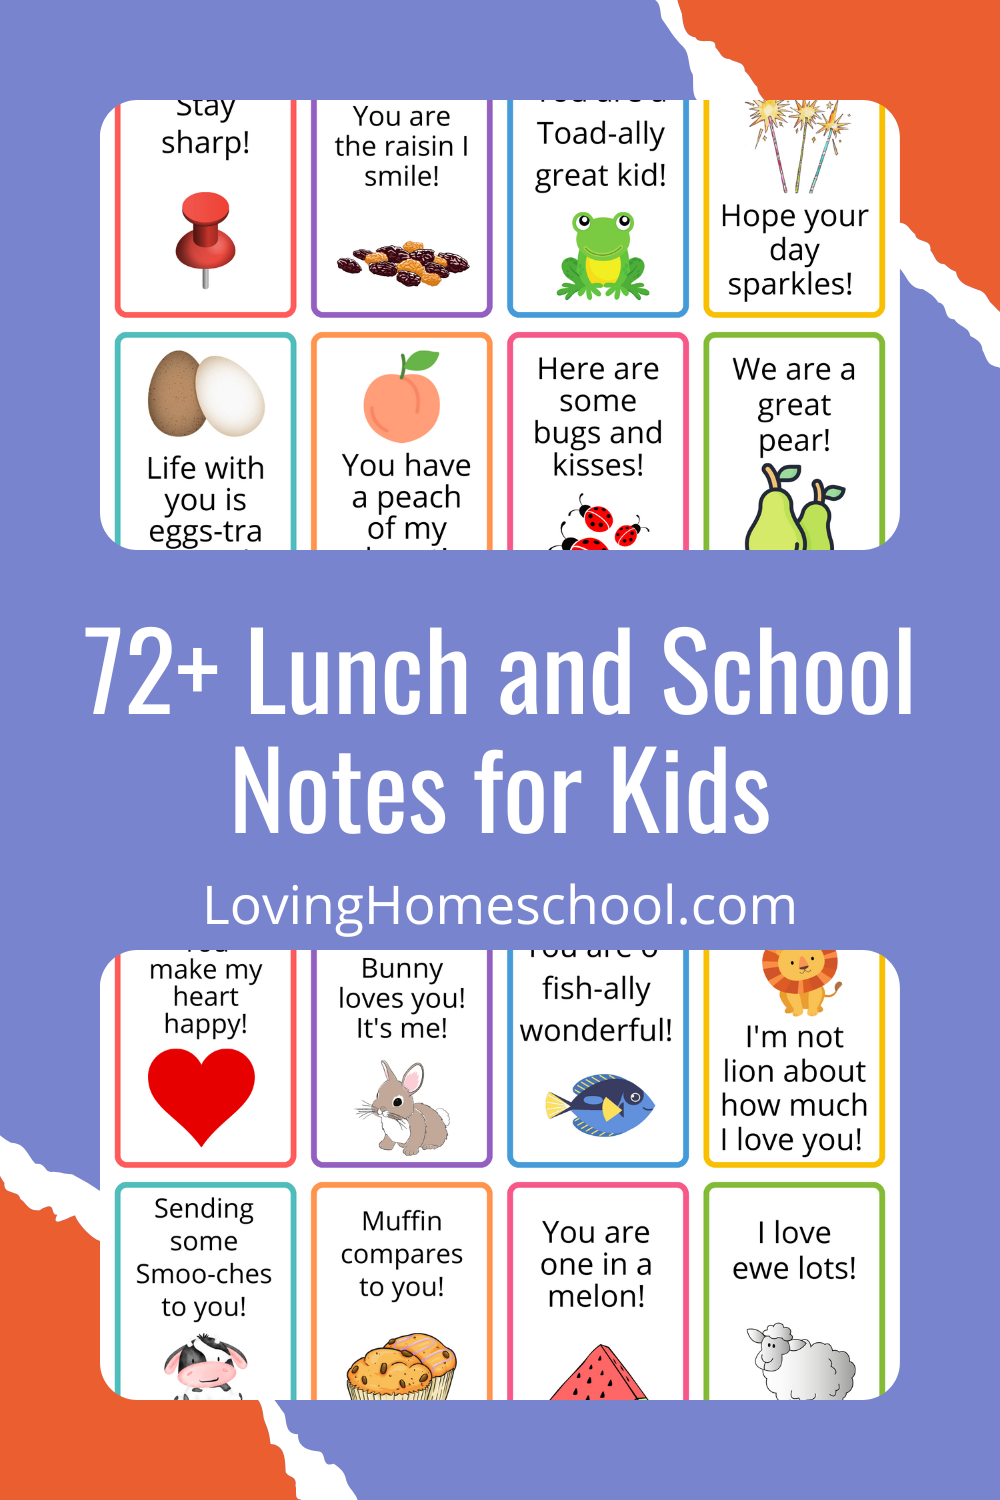 72+ Lunch and School Notes for Kids Pinterest Pin